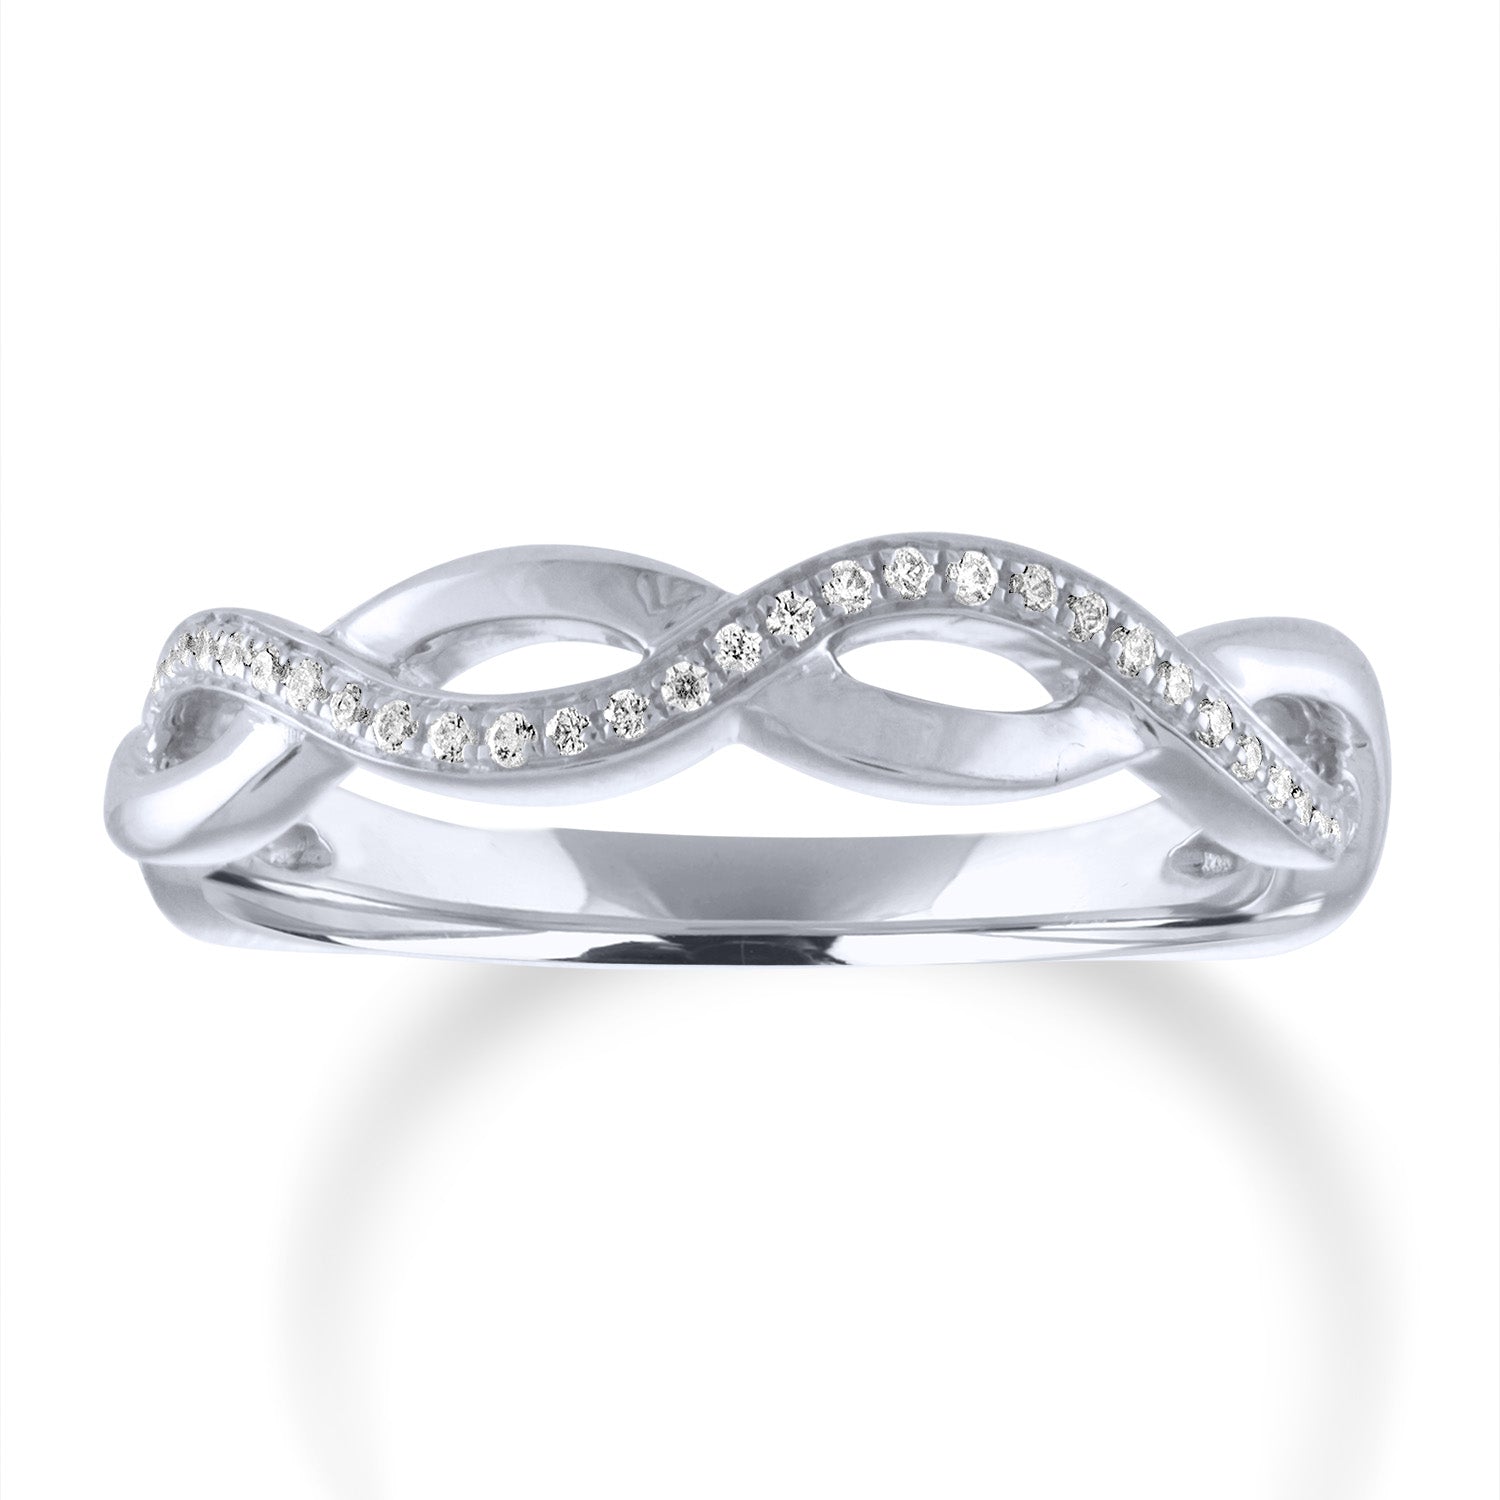 14KWG BR 0.16CTW DIA TWISTED HALF PLAIN STACKABLE BAND.